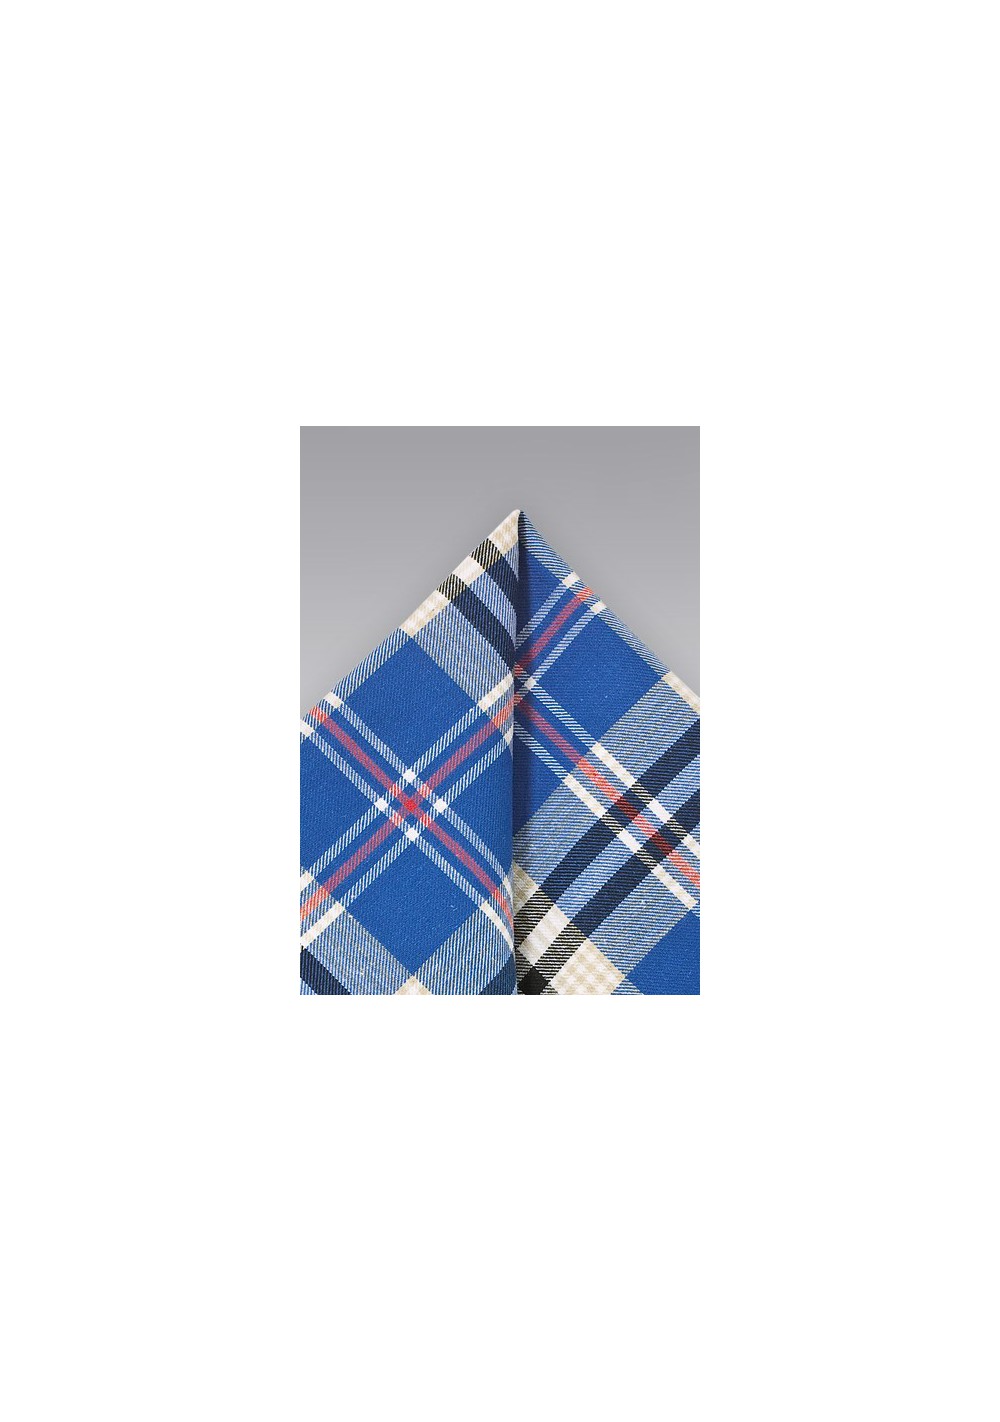 Cotton Plaid Pocket Square in Blue, Beige, and Black